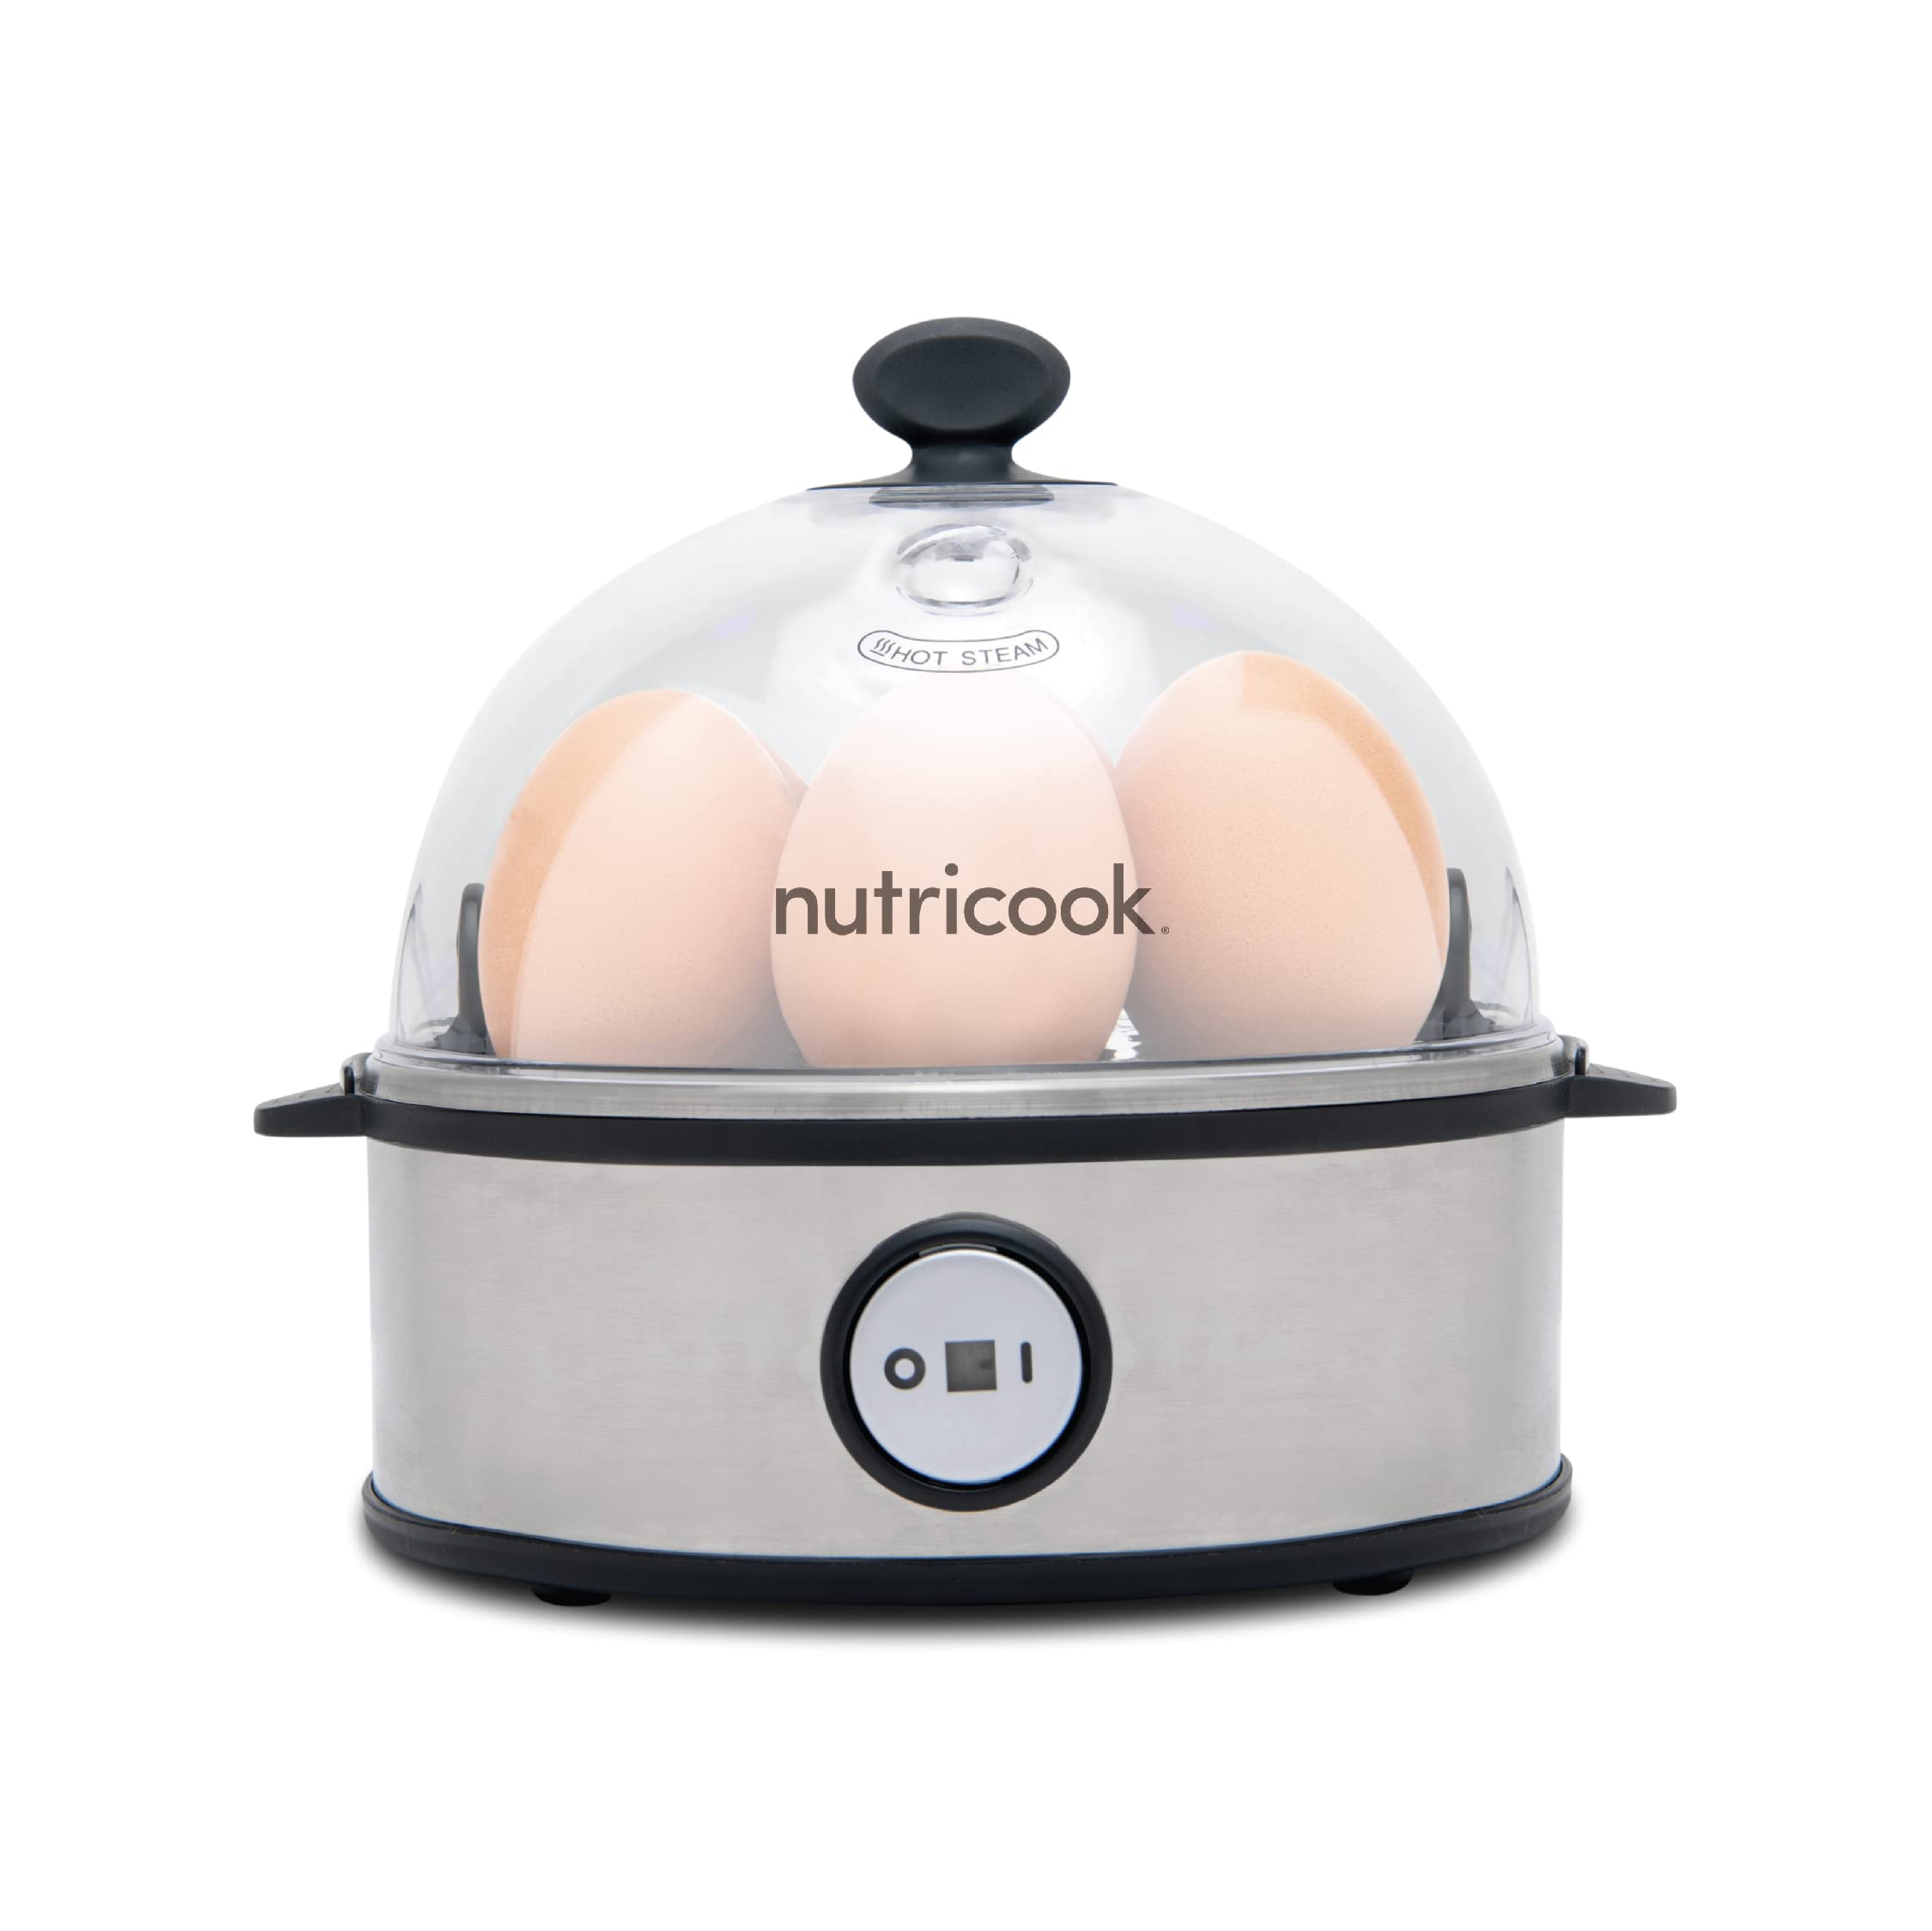 NutriCook Rapid Egg Cooker: 7 Egg Capacity Electric Egg Cooker for Boiled Eggs, Poached Eggs, Scrambled Eggs, or Omelettes with Auto Shut Off Feature - Silver